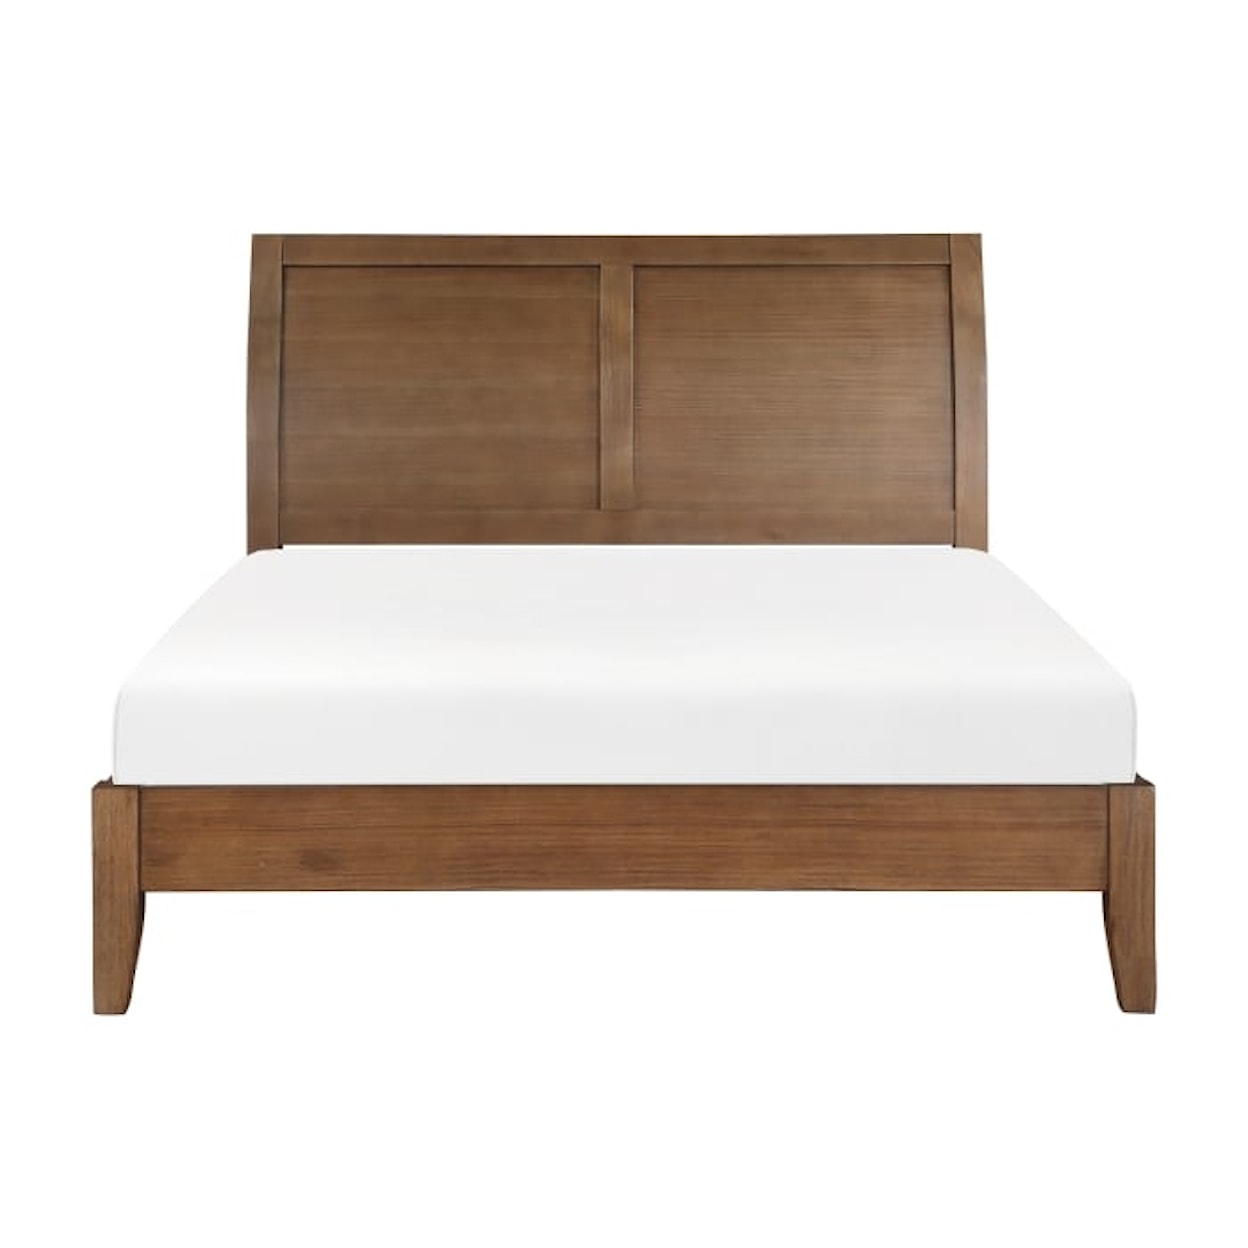 Homelegance Miscellaneous California King Bed